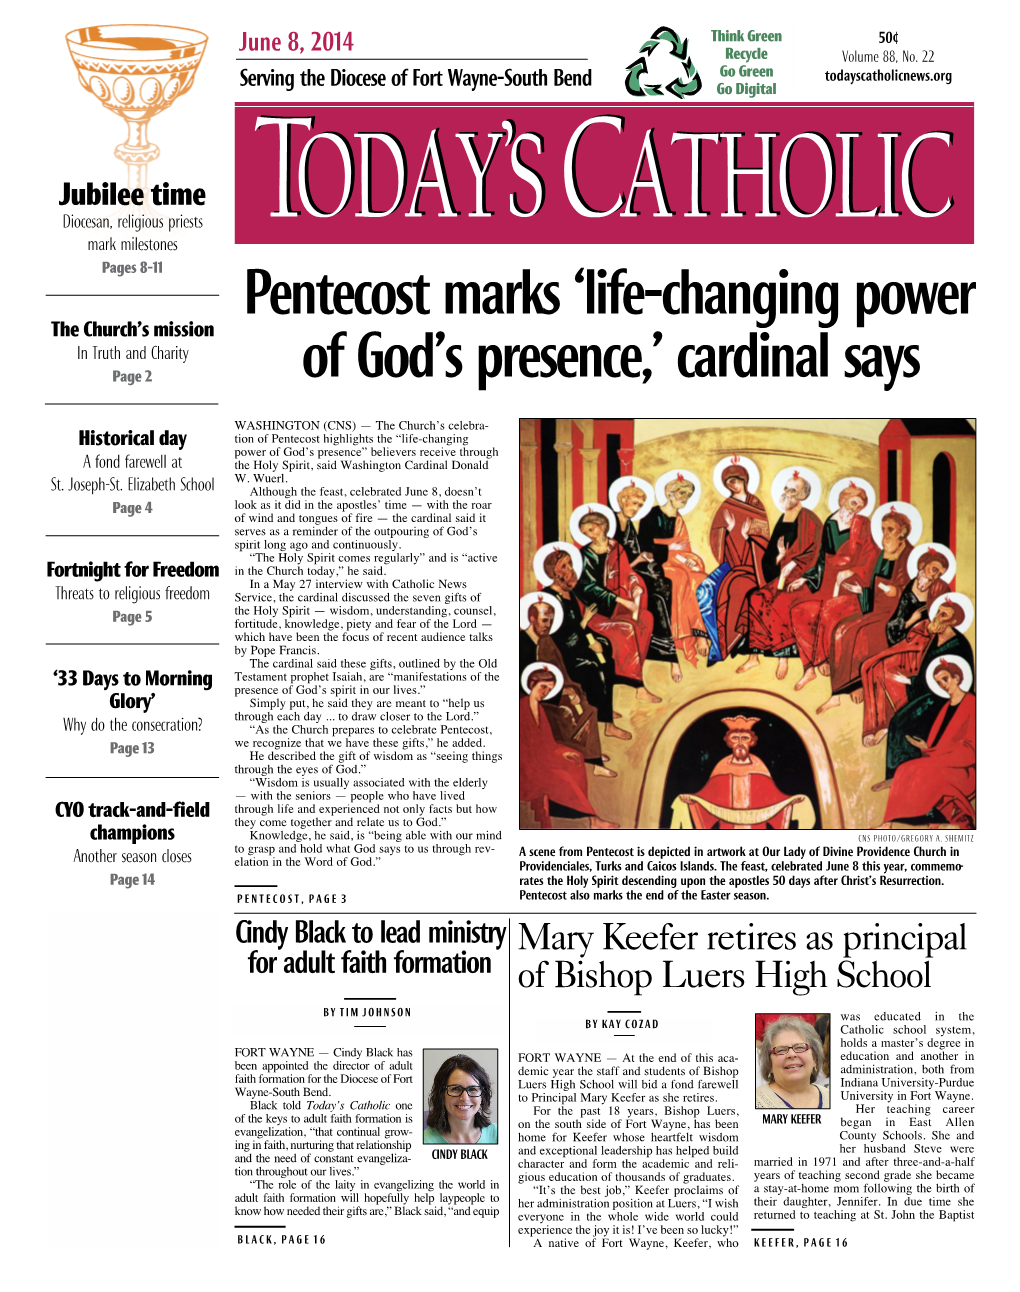 Pentecost Marks ‘Life-Changing Power the Church’S Mission in Truth and Charity Page 2 of God’S Presence,’ Cardinal Says